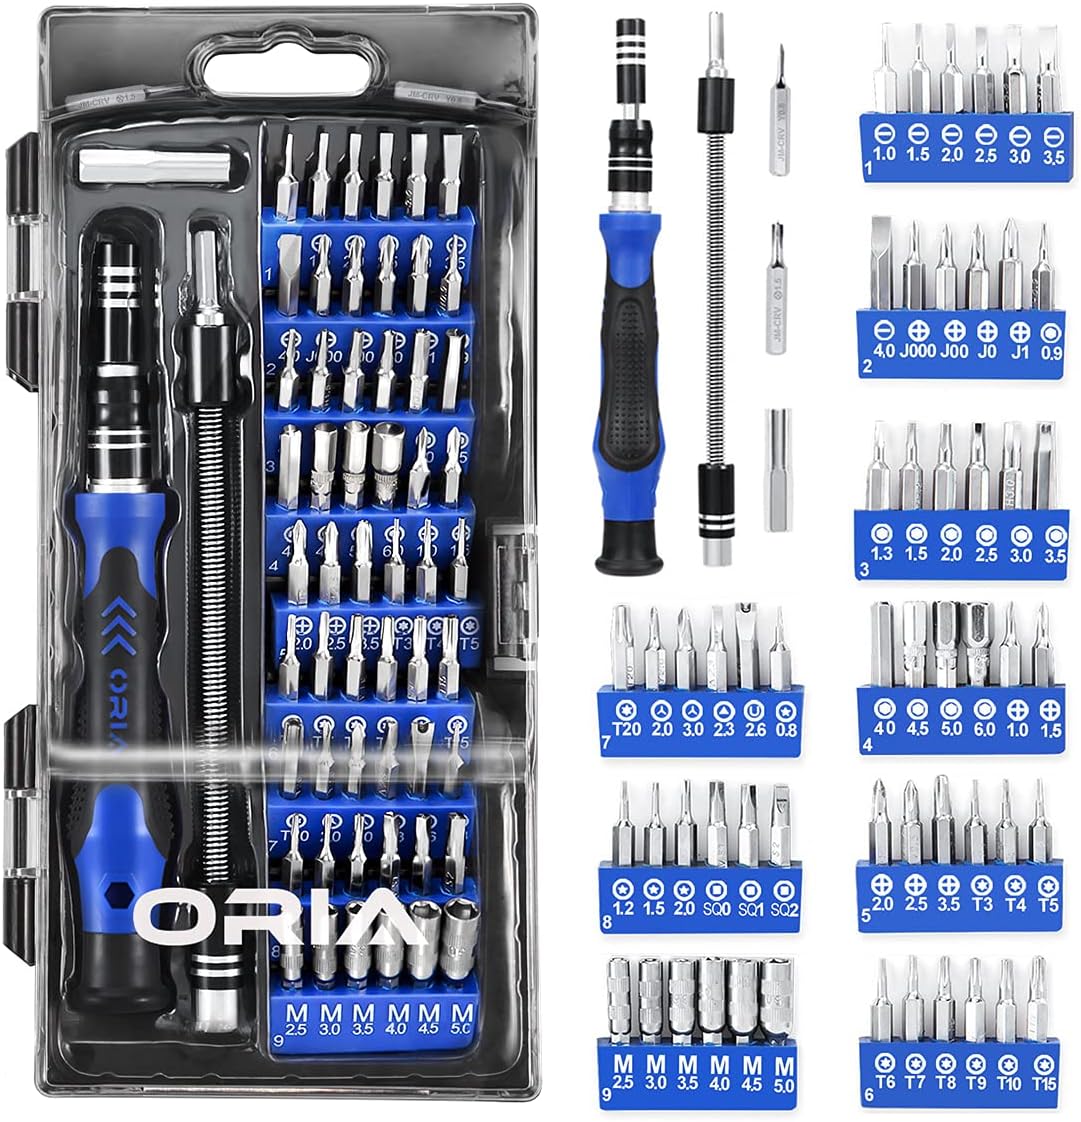 Oria Precision Screwdriver Kit, 60 in 1 with 56 Bits Screwdriver Set, Magnetic Driver Kit with Flexible Shaft, Extension Rod for Mob